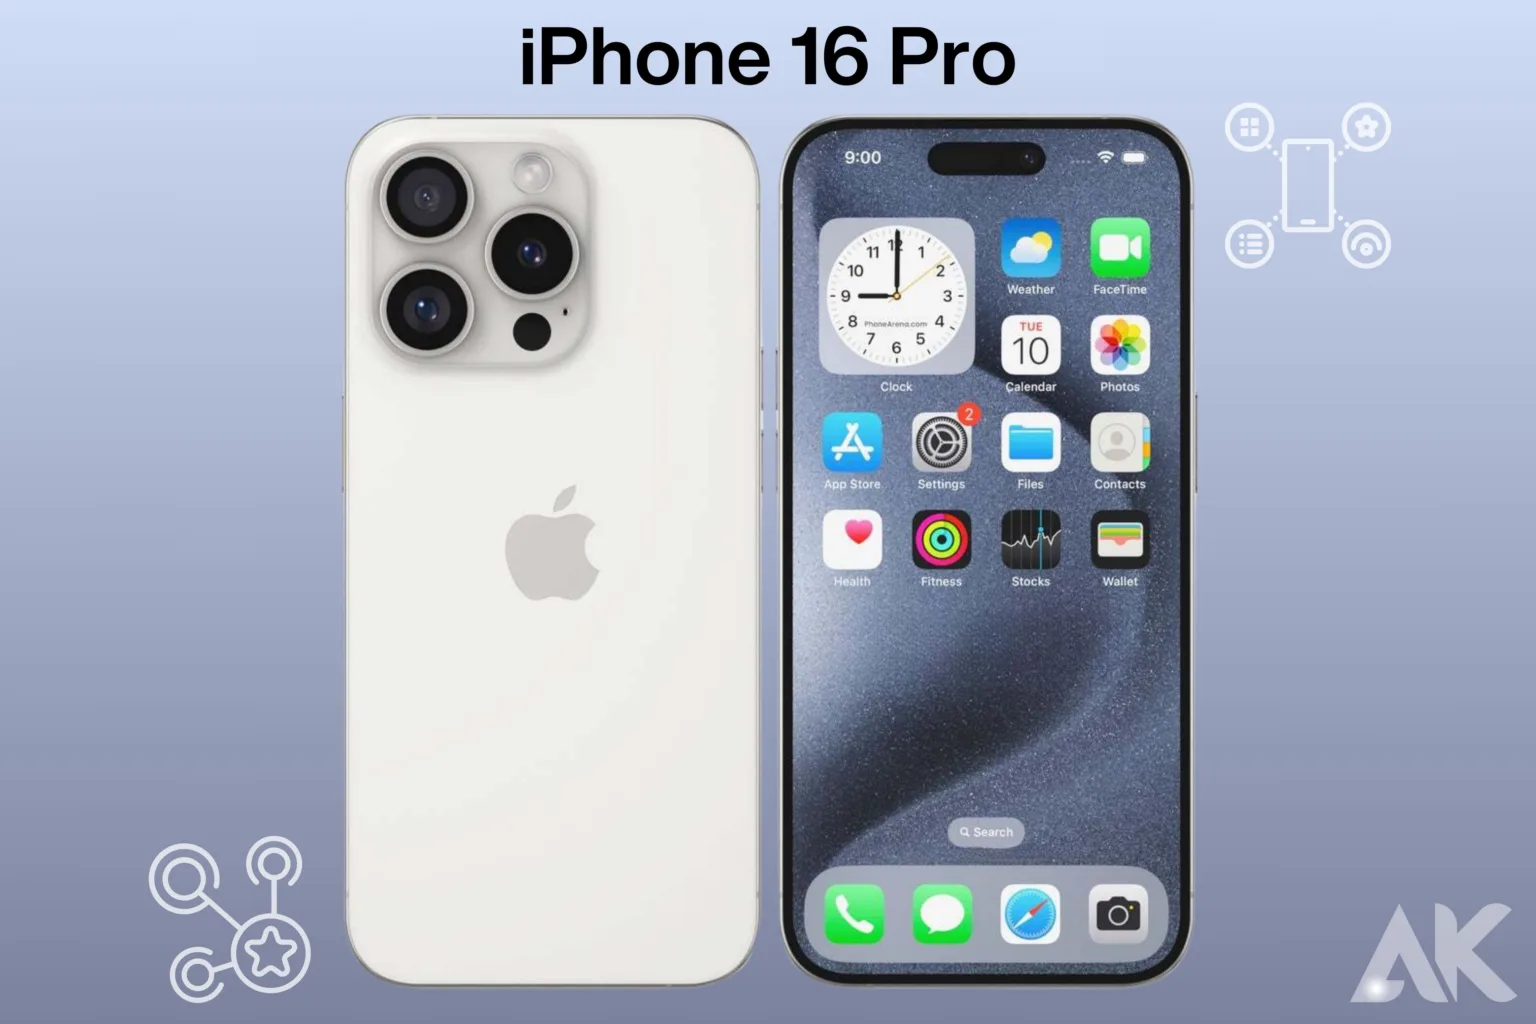 iPhone 16 Pro features